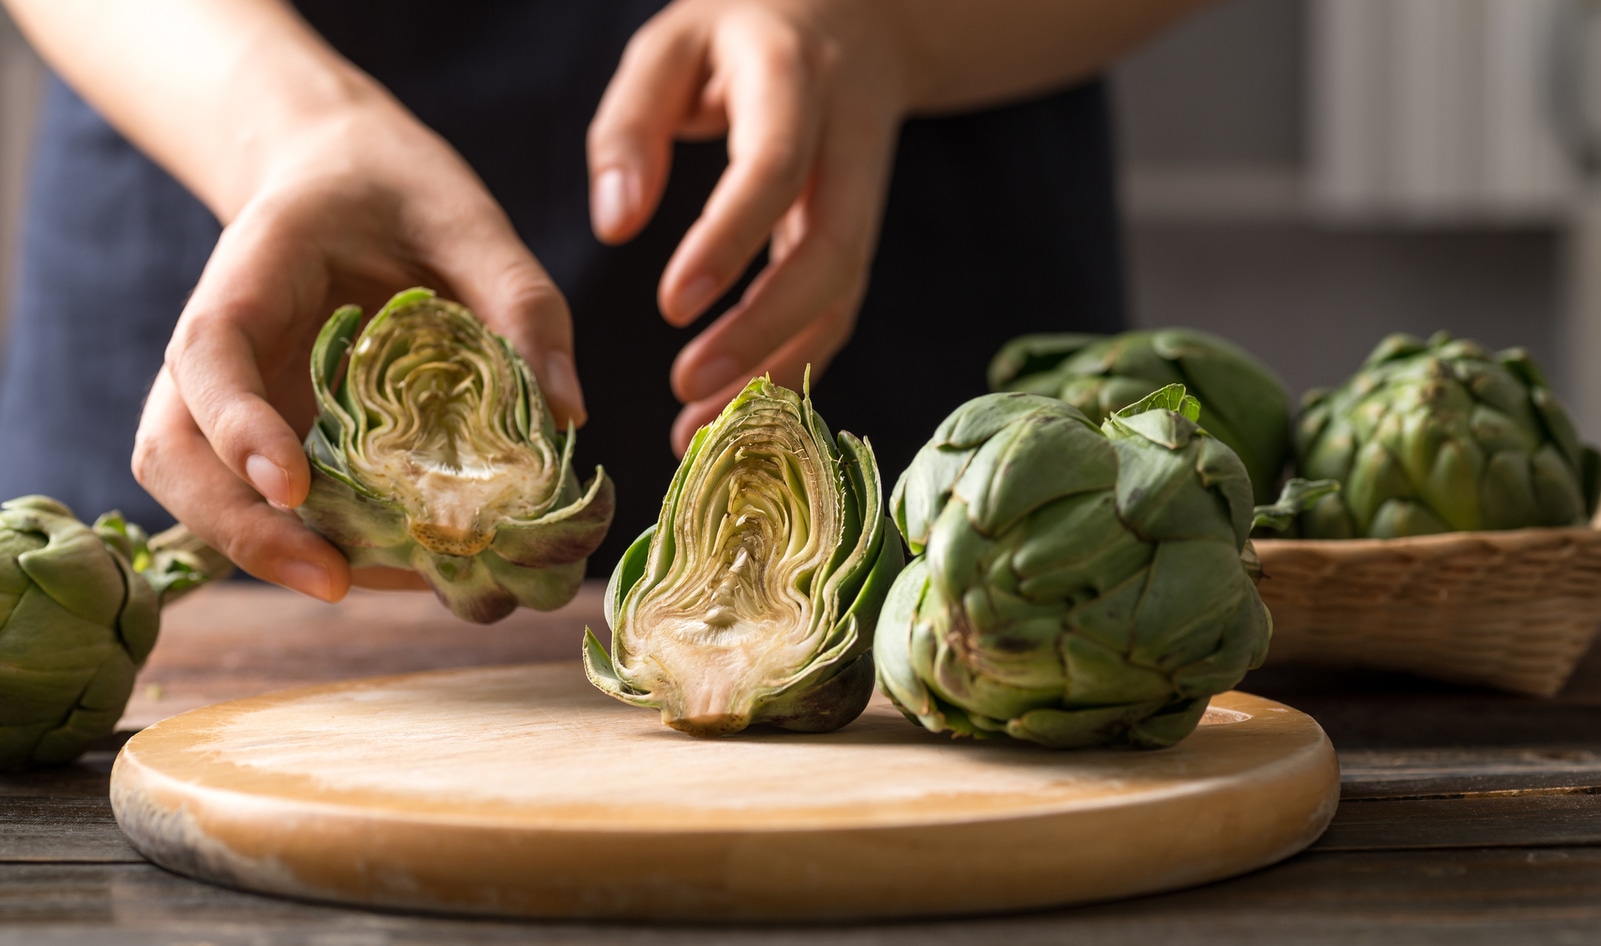 Artichokes Deserve a Spot in Your Diet: Here's Why